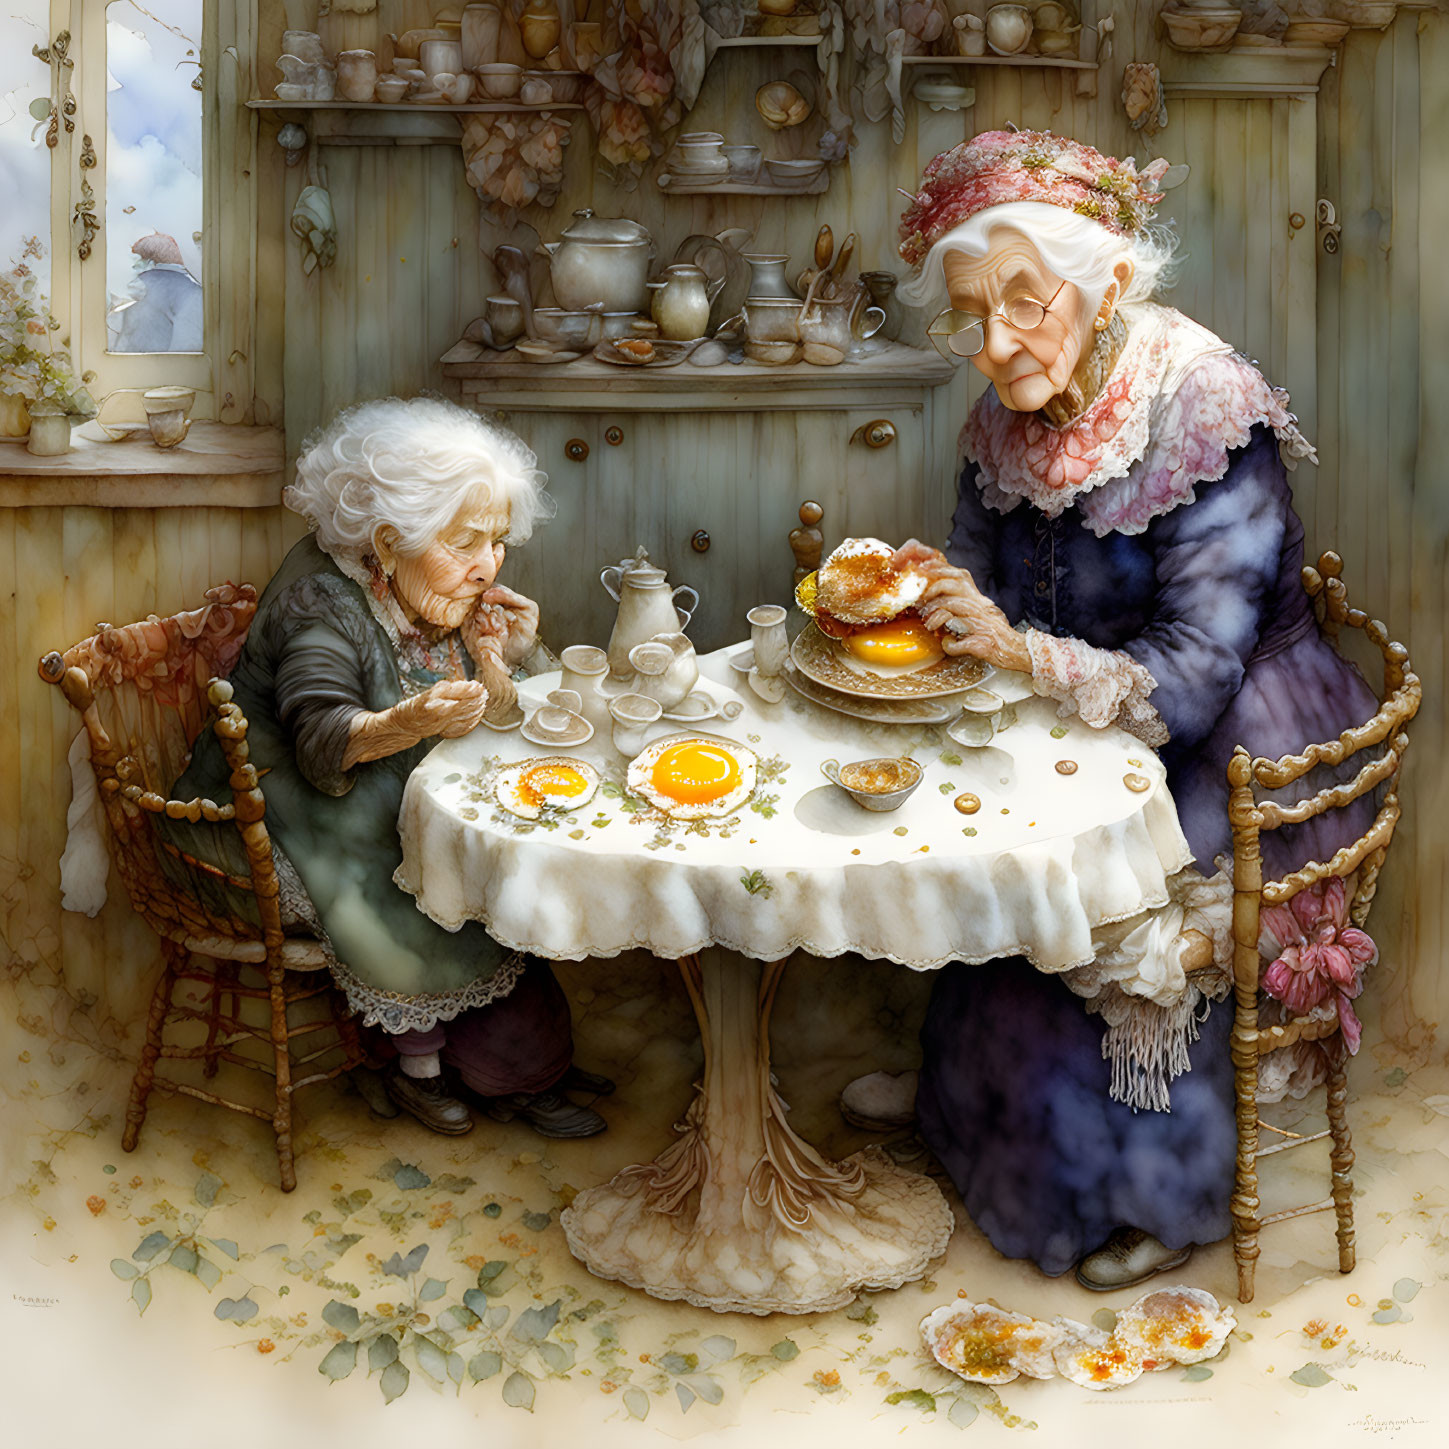 Old woman and a little boy eat a fried egg at tabl